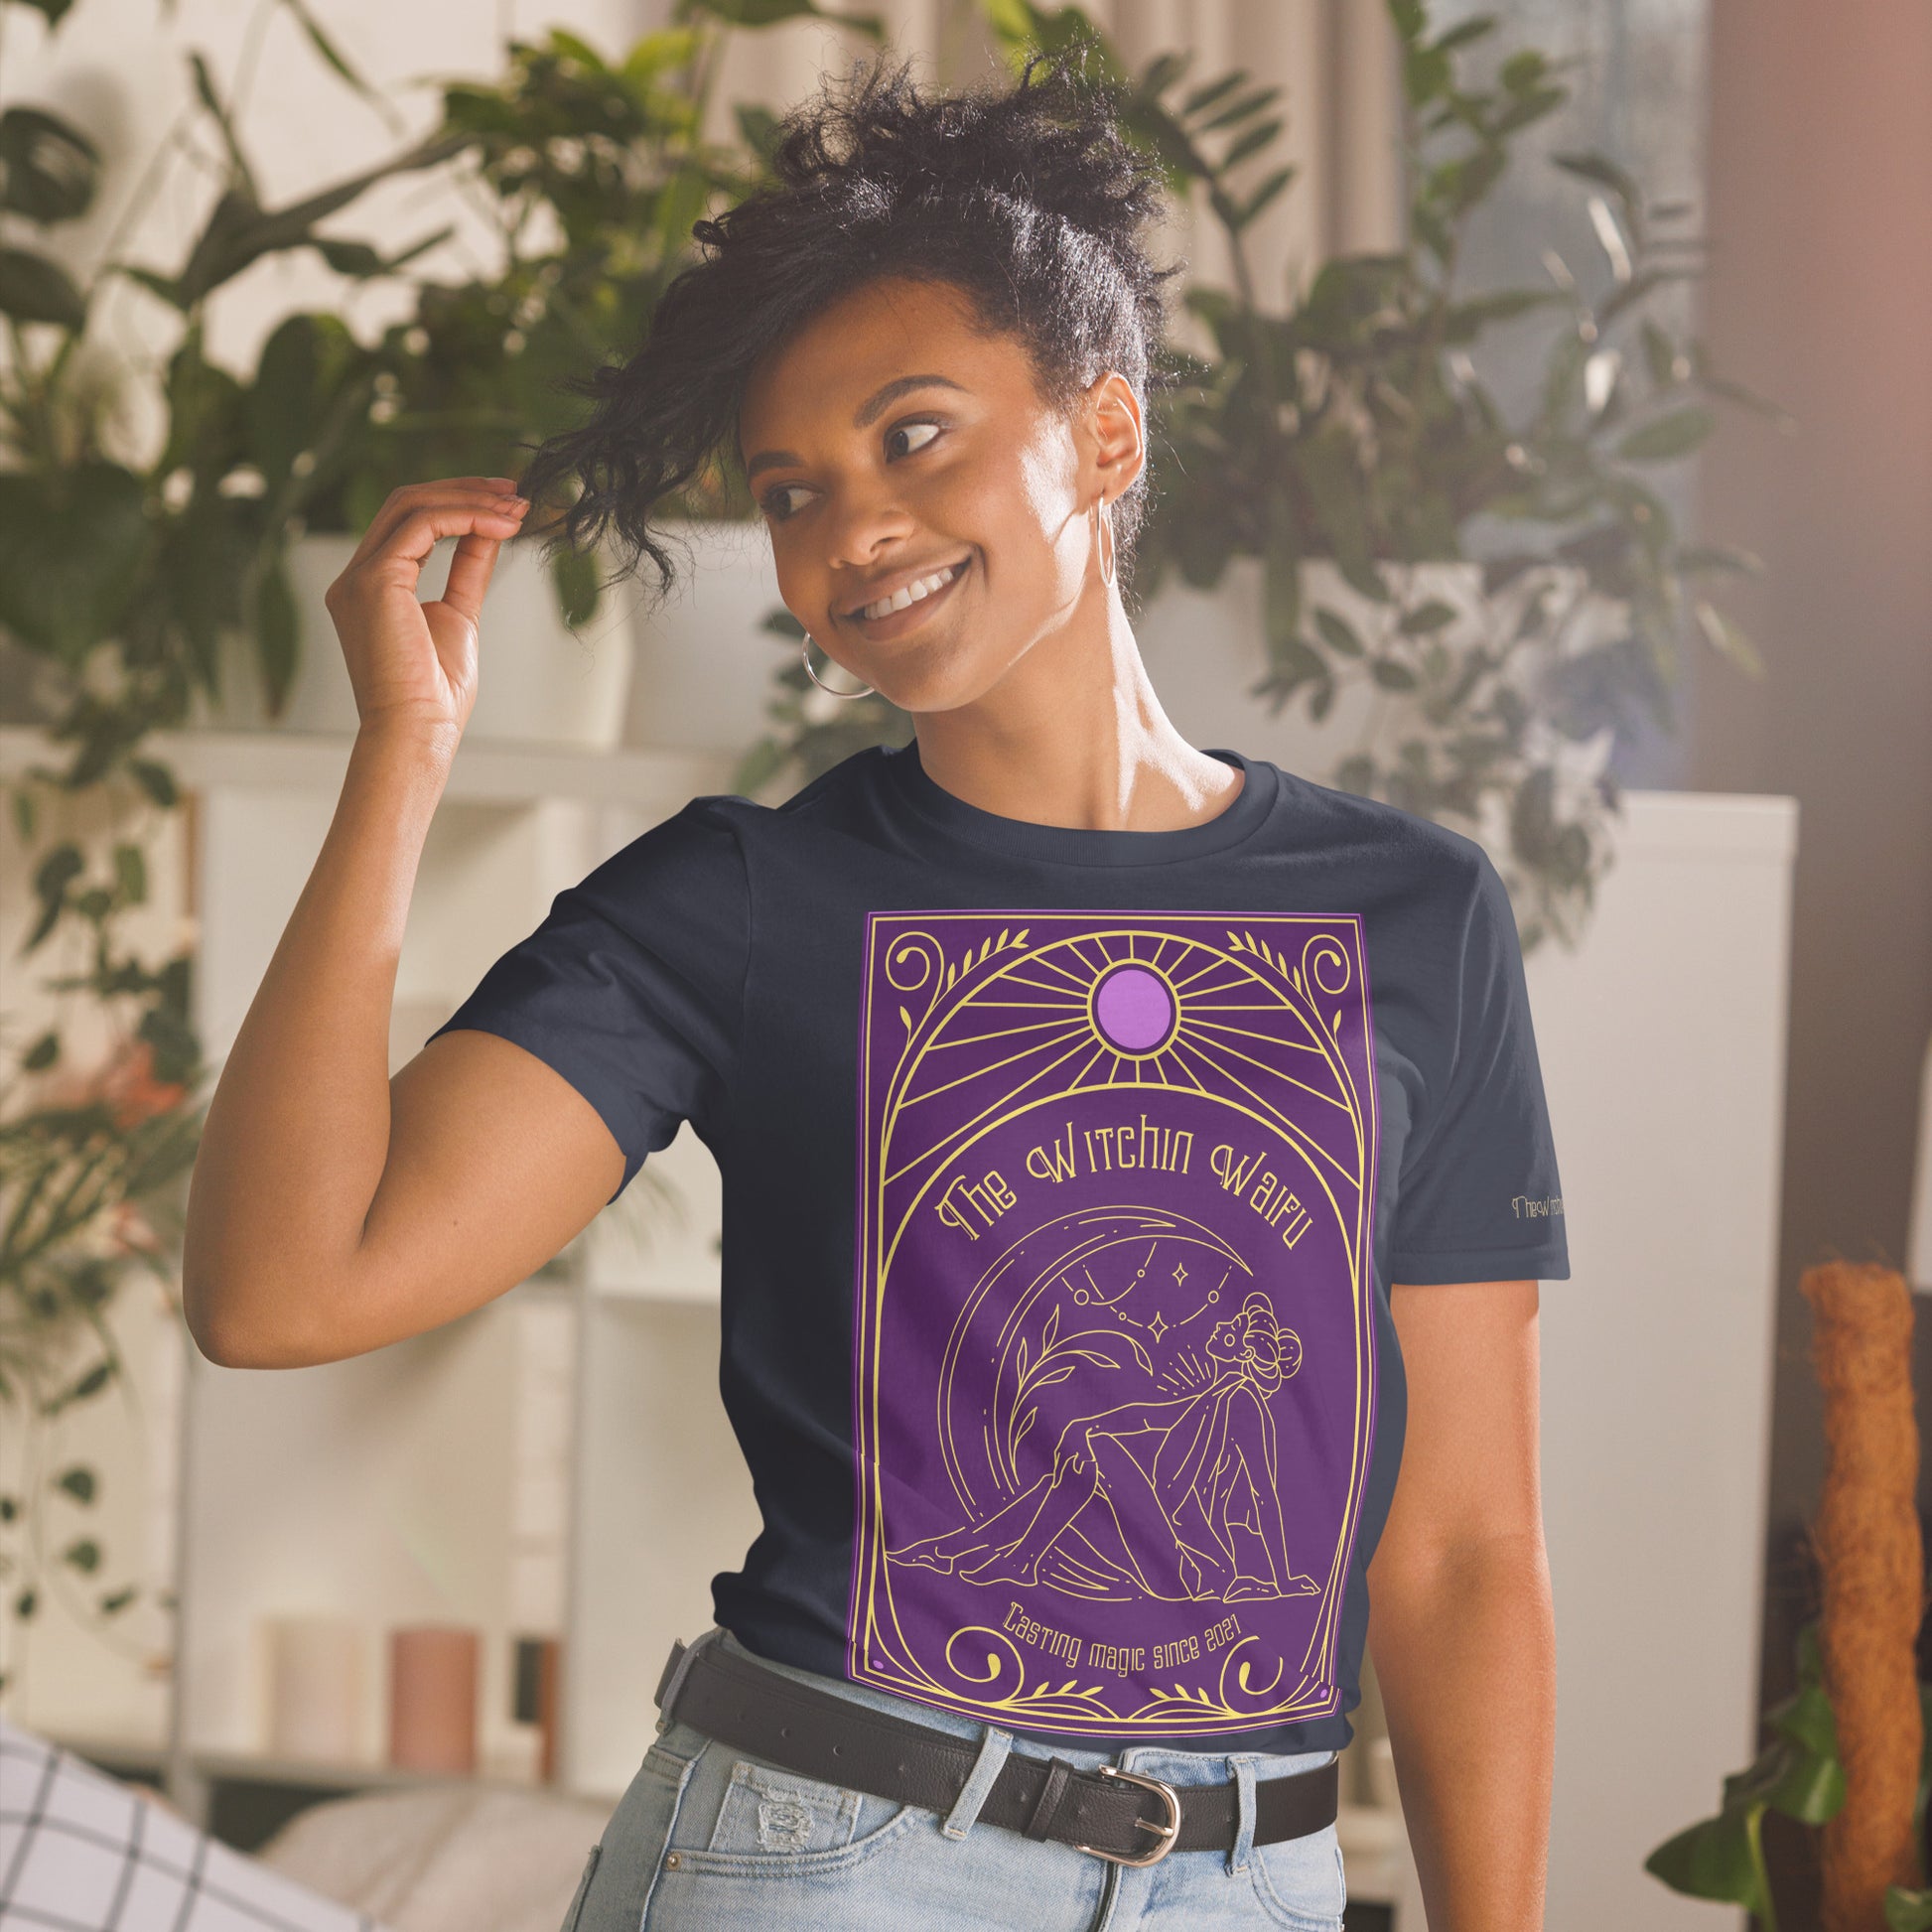 Witchin Waifu Tarot Card Short-Sleeve Unisex T-ShirtYou've now found the staple t-shirt of your wardrobe. It's made of 100% ring-spun cotton and is soft and comfy. The double stitching on the neckline and sleeves add Witchin Waifu